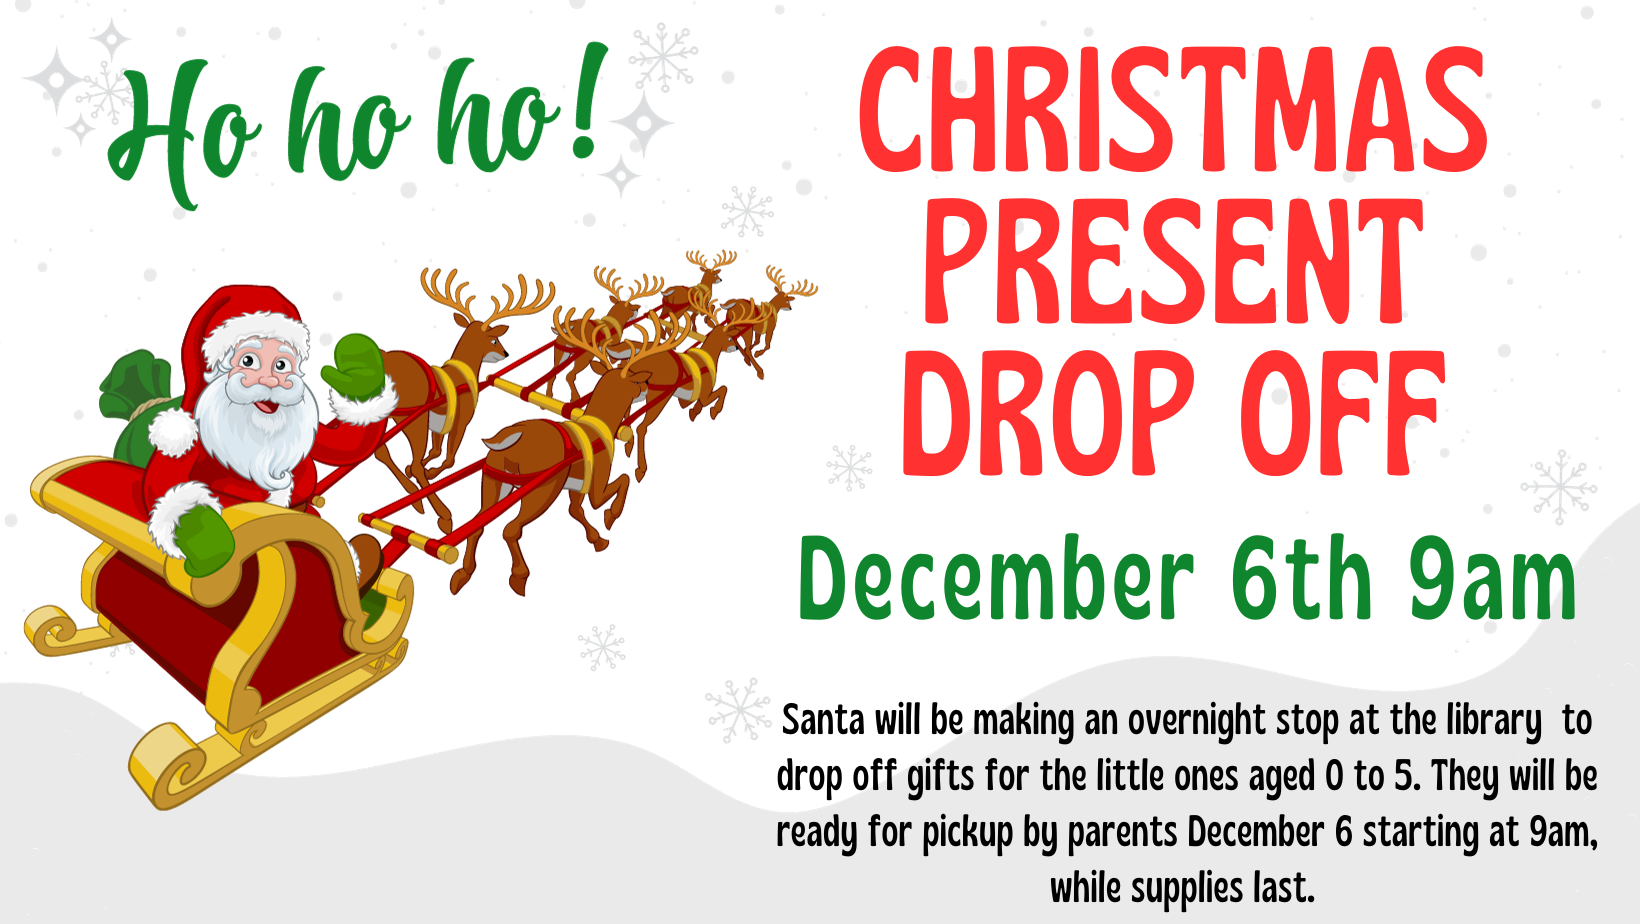 Santa Christmas Present Drop-off, December 6 beginning at 9 am, for ages birth to 5 years